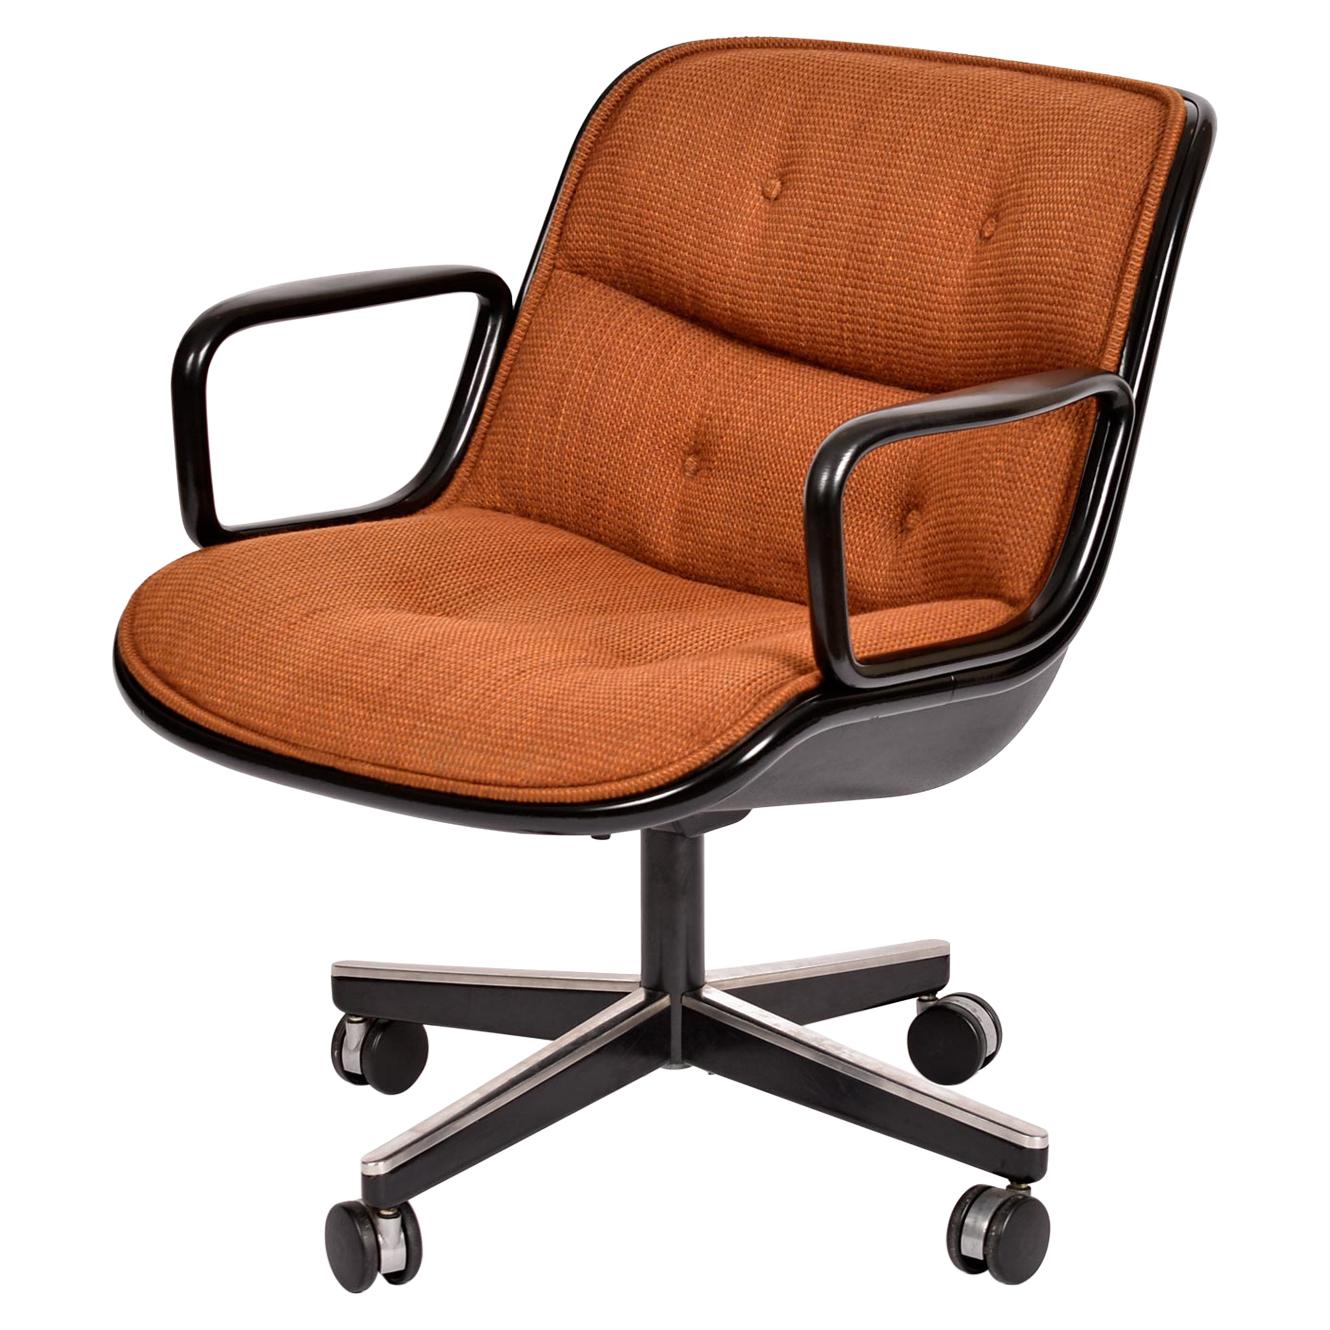 Charles Pollack for Knoll Orange Tweed Executive Chair w/ Height Tension Knob